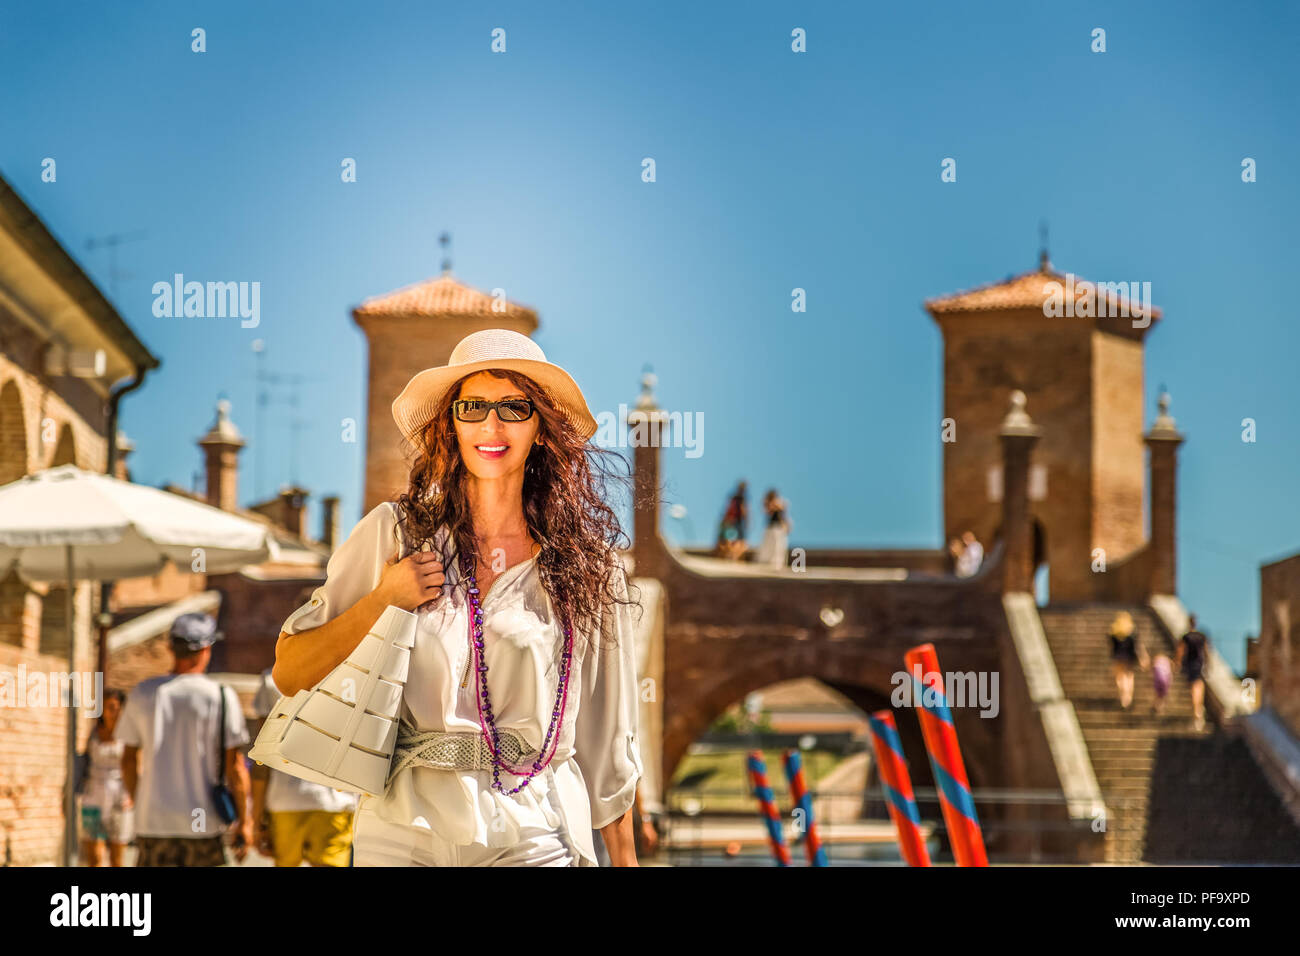 Mature woman with wide hat on vacation goimg for shopping in a Venice-like town in Italy Stock Photo